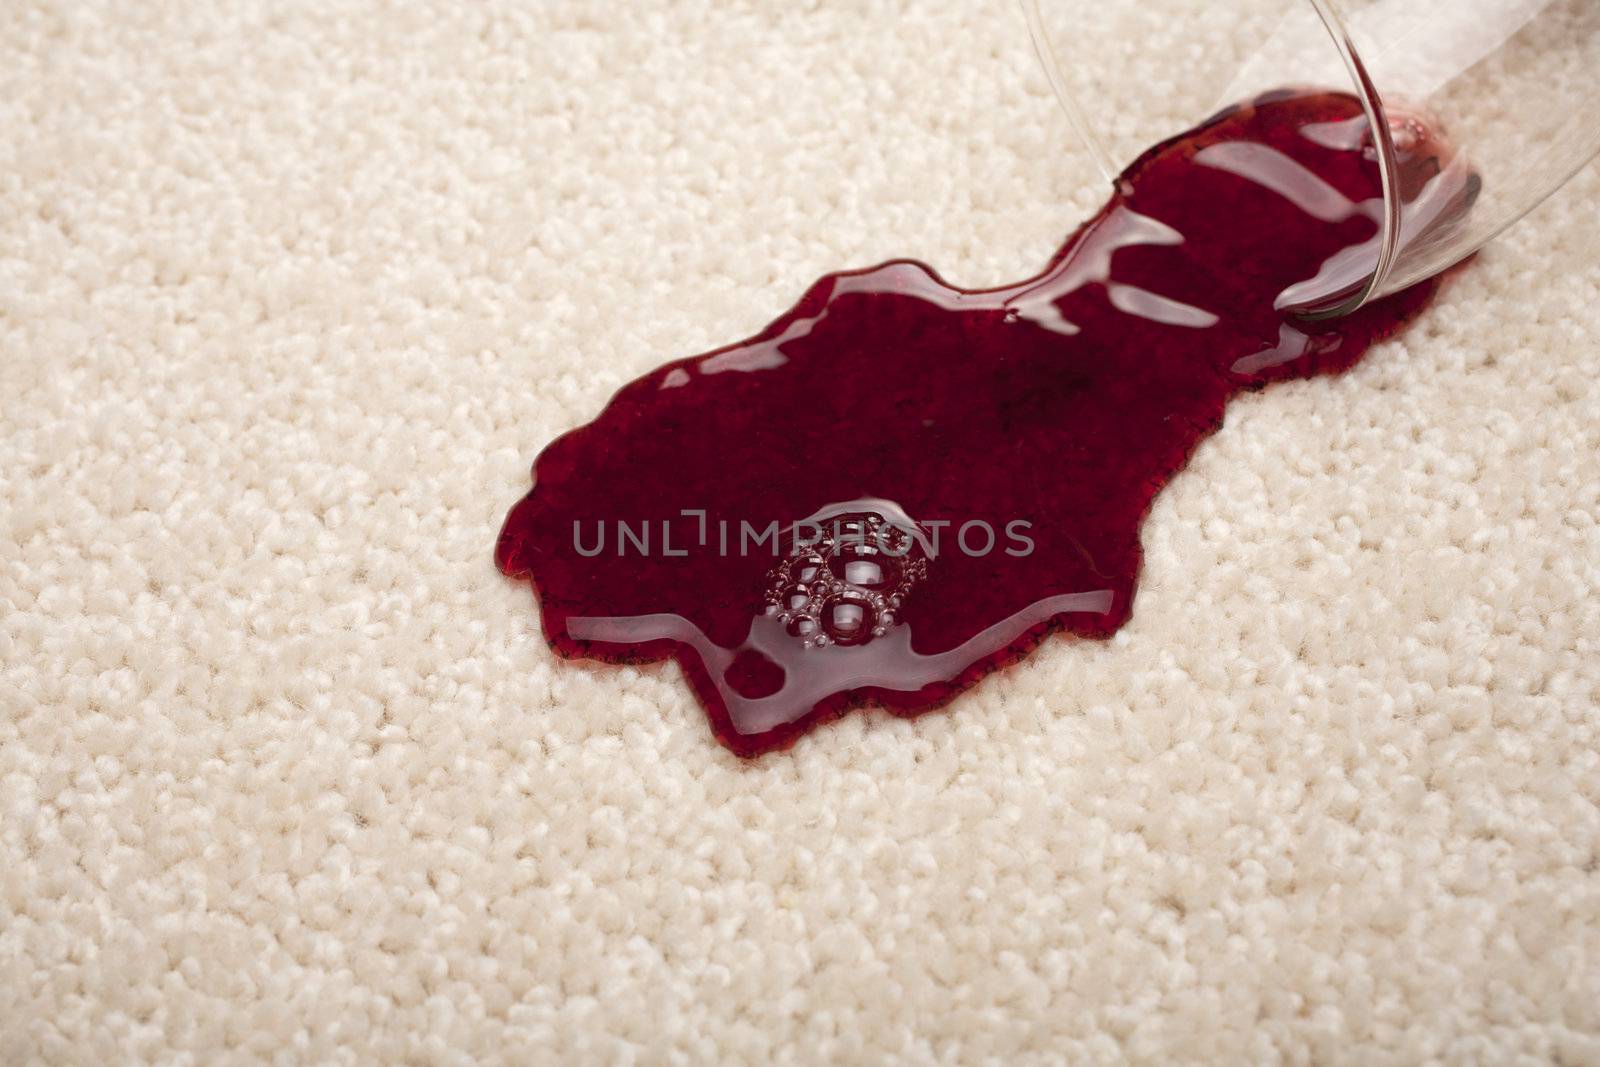 Red wine spilling from a glass onto a light coloured carpet.